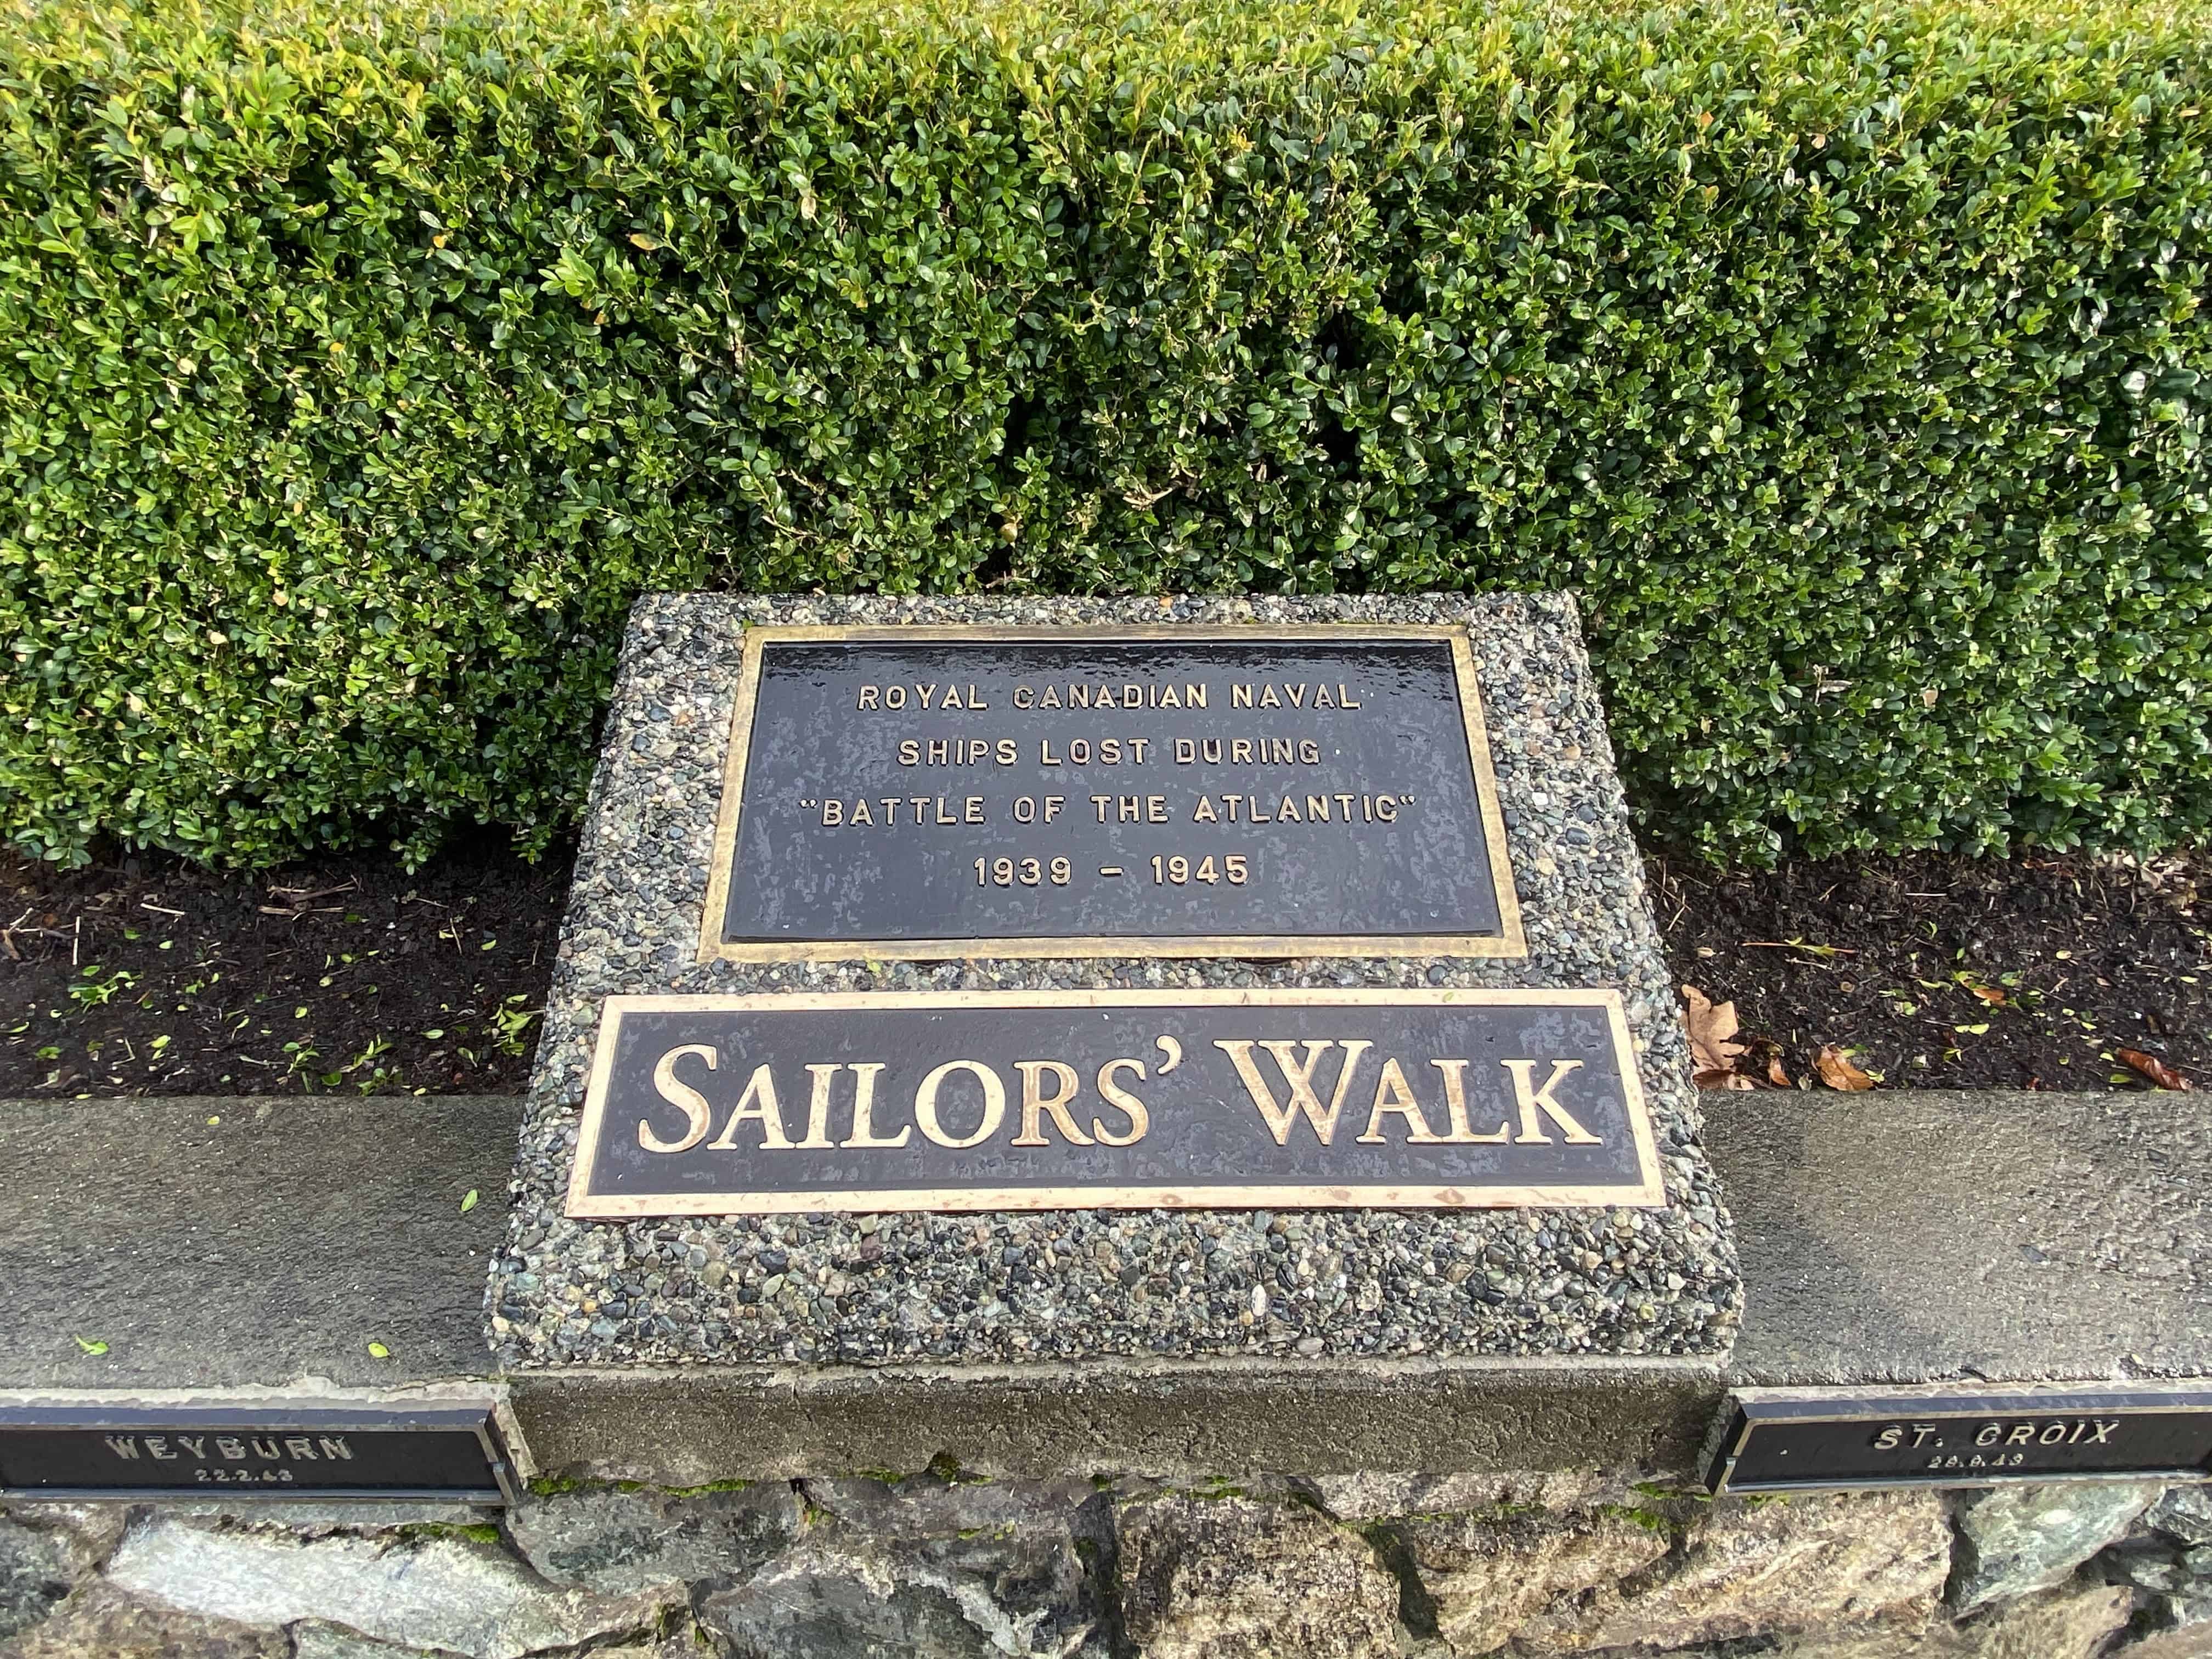 Sailors' Walk monument in Memorial Park, where the Remembrance Day ceremonies are held in Esquimalt.  This park is very close to downtown Victoria, straight down Esquimalt Road.  